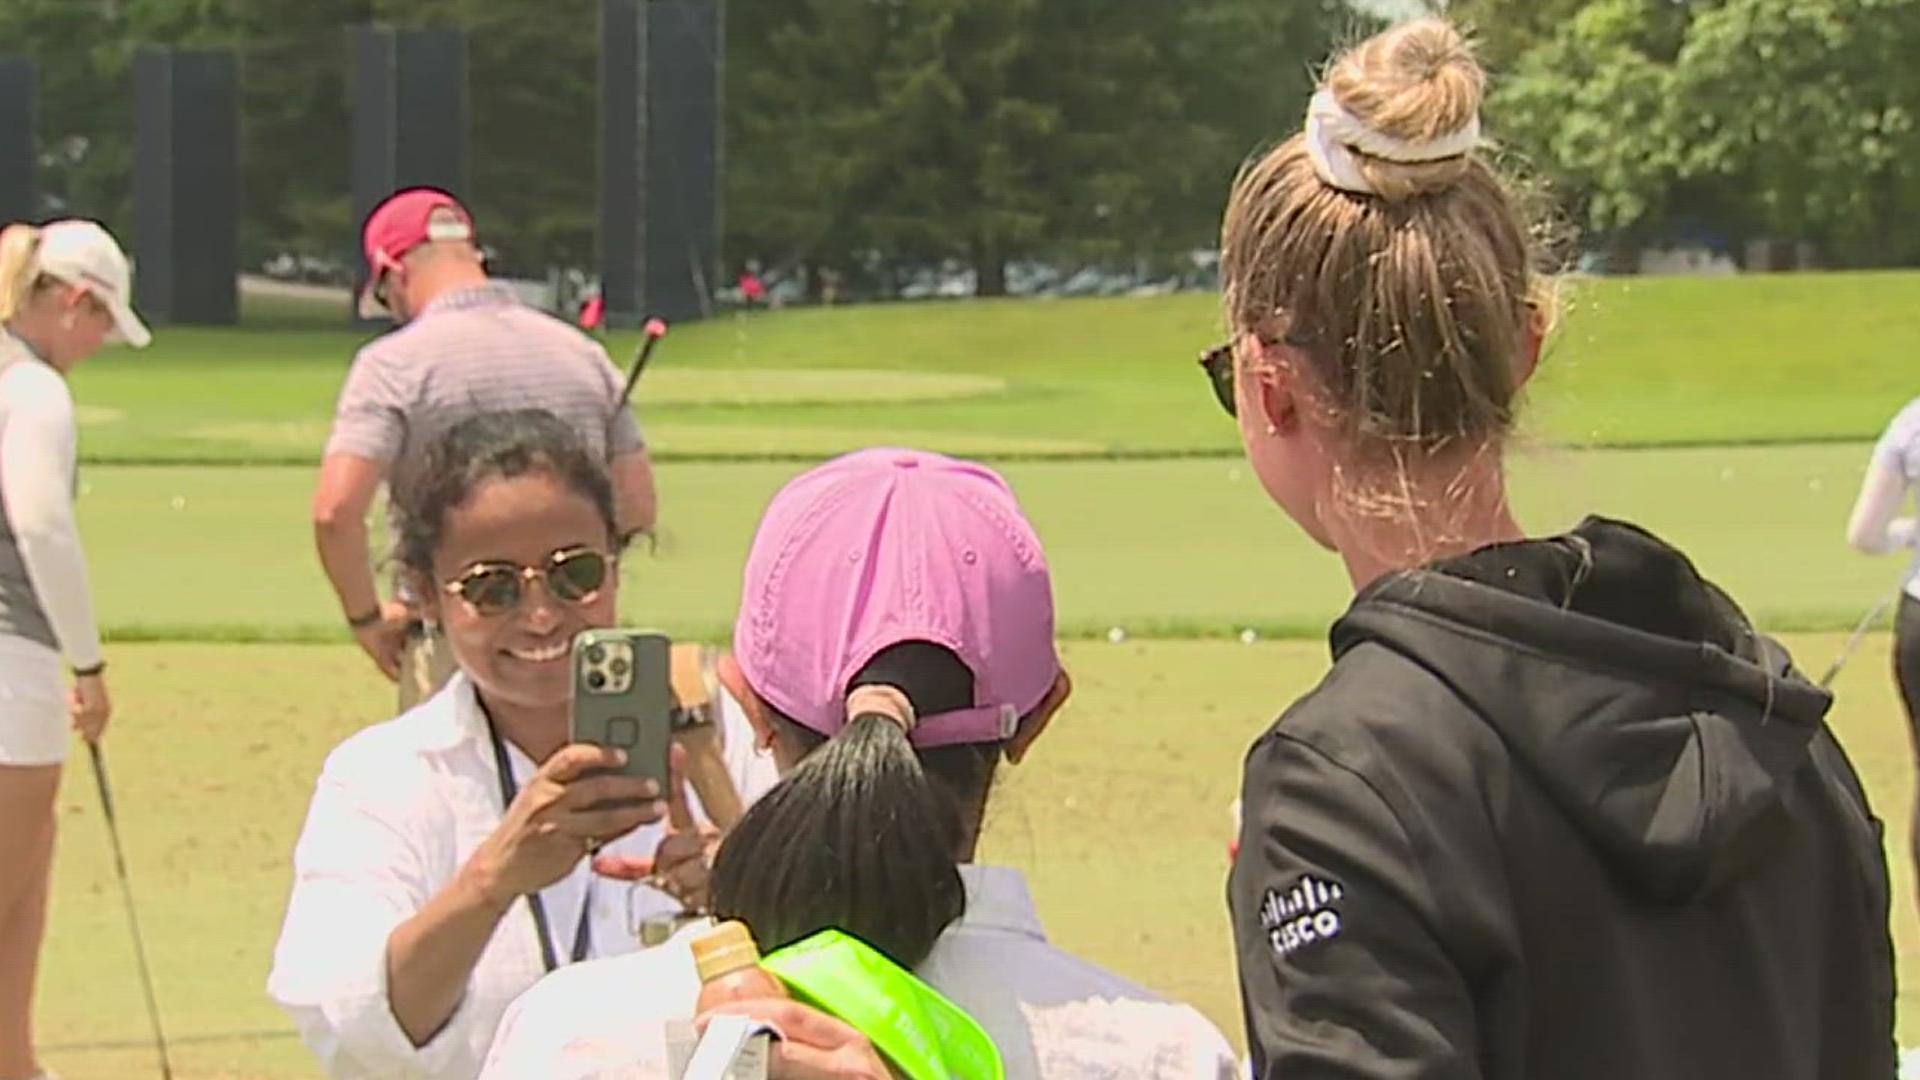 Some of the best moments of the week happen when fans and players can interact, mostly at the practice areas like the putting green and driving range.